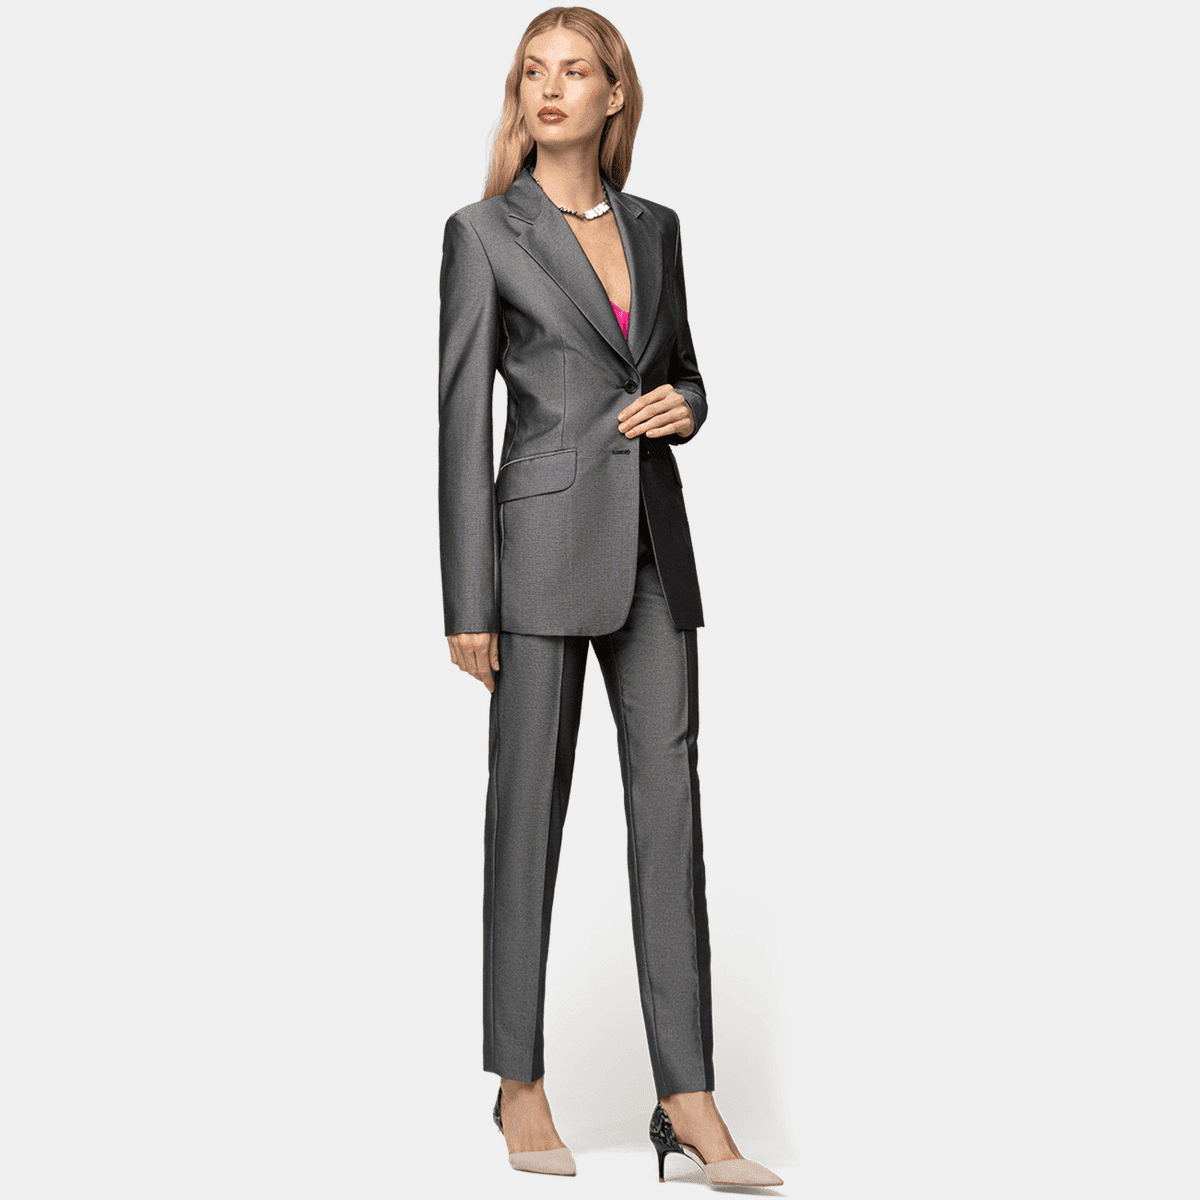 Plus Size Pant Suits for Women - Sumissura